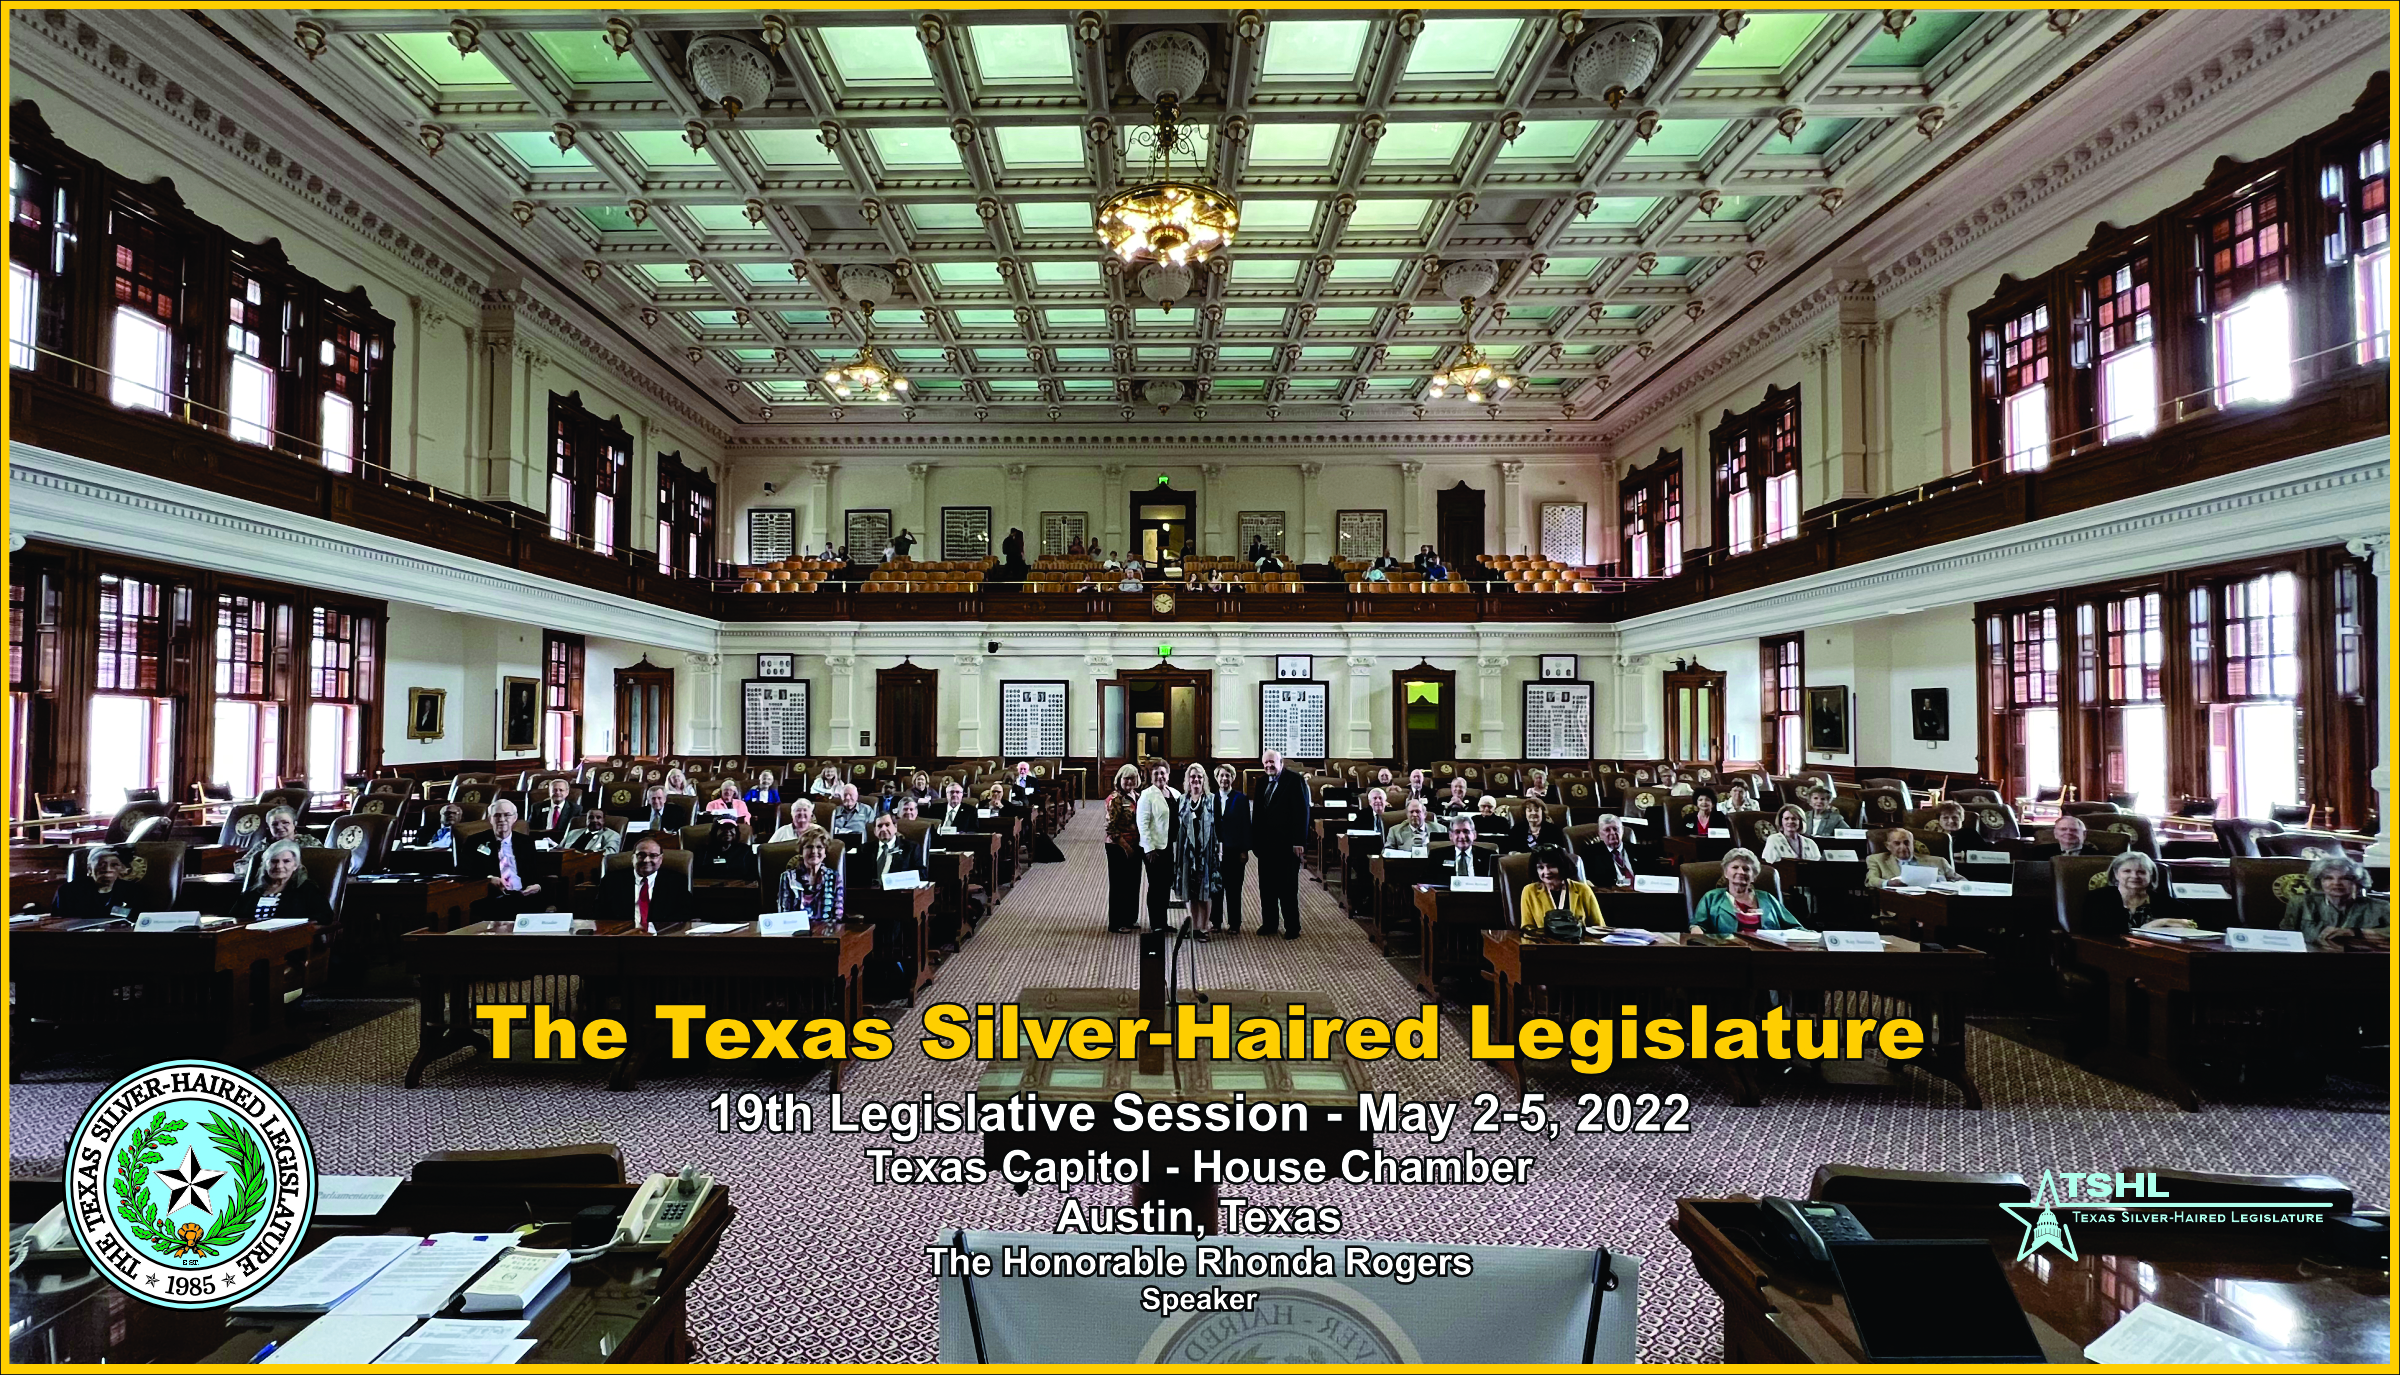 TSHL - Our members in the Rotunda, working to improve the lives of older Texans